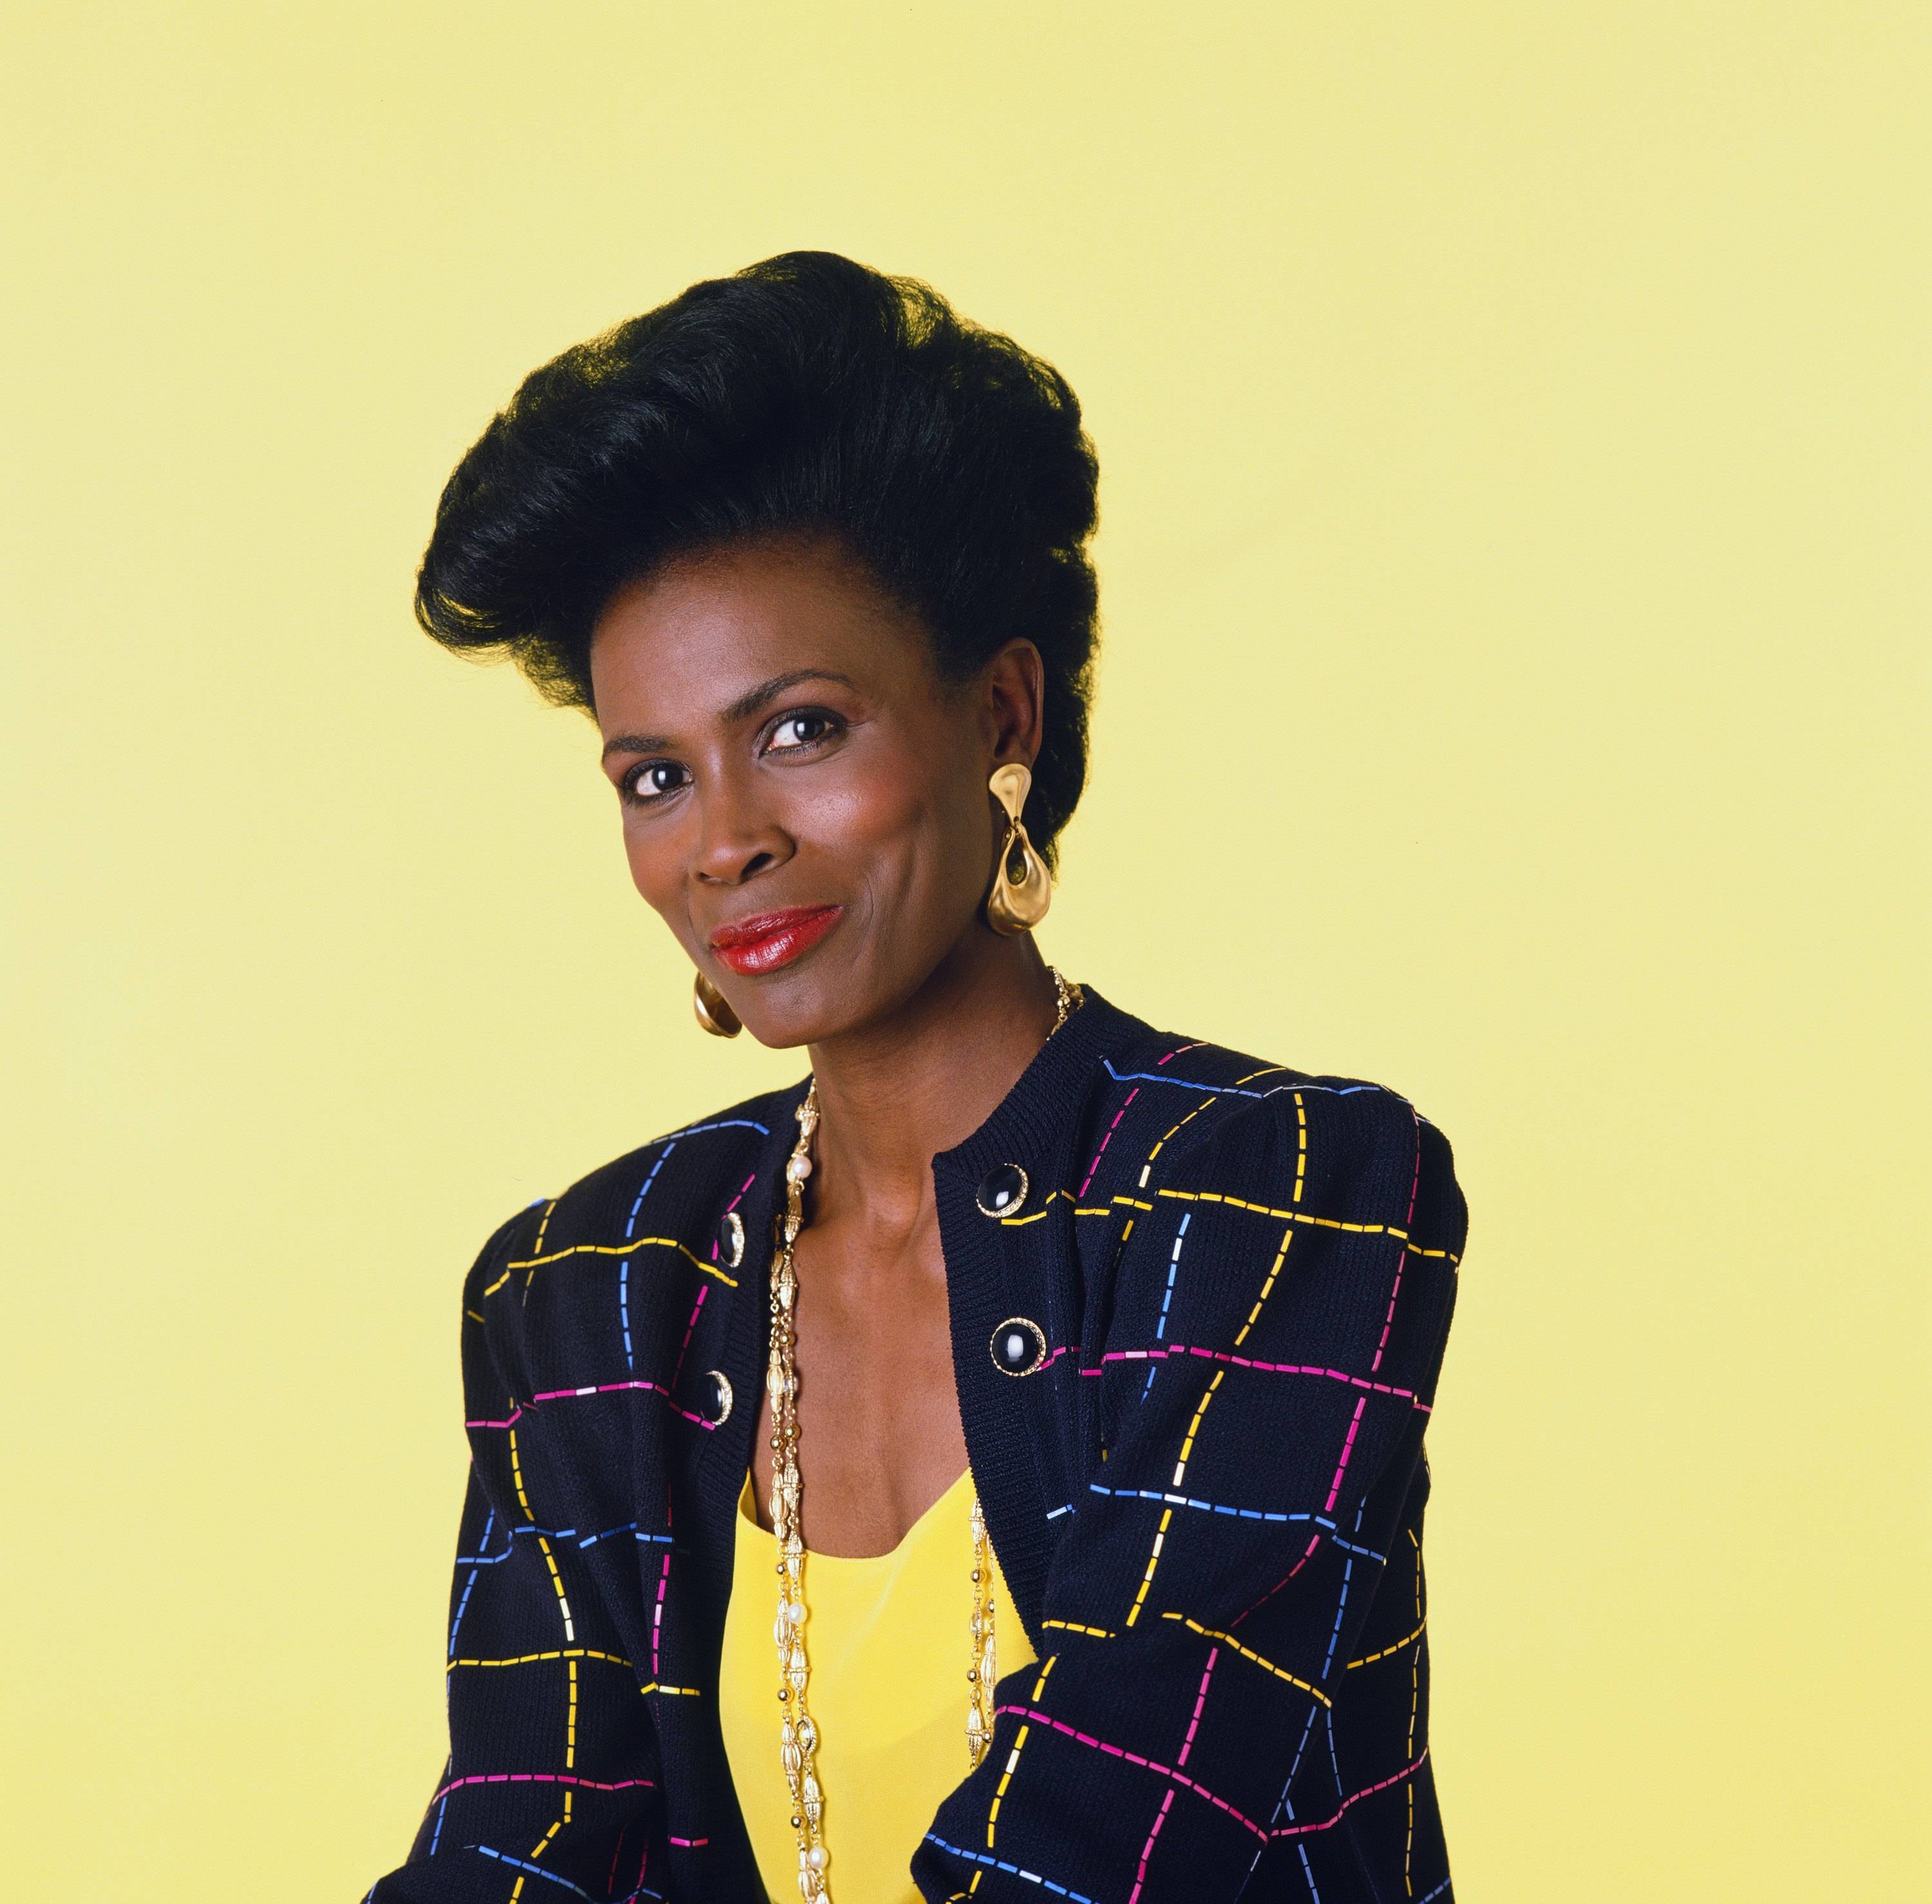 The Fresh Prince Of Bel-Air — Vivane Banks, played by actress Janet Hubert, is the vivacious, no-nonsense, nurturing, and valiant mother of Nicky, Ashley, Carlton, and Hillary Bank and the aunt of Will Smith. Regarding iconic television mothers, Mrs. Banks can’t be forgotten, (The character was portrayed in later years by actress Daphne Maxwell Reid.) Photo by: Chris Cuffaio/NBCU Photo Bank
